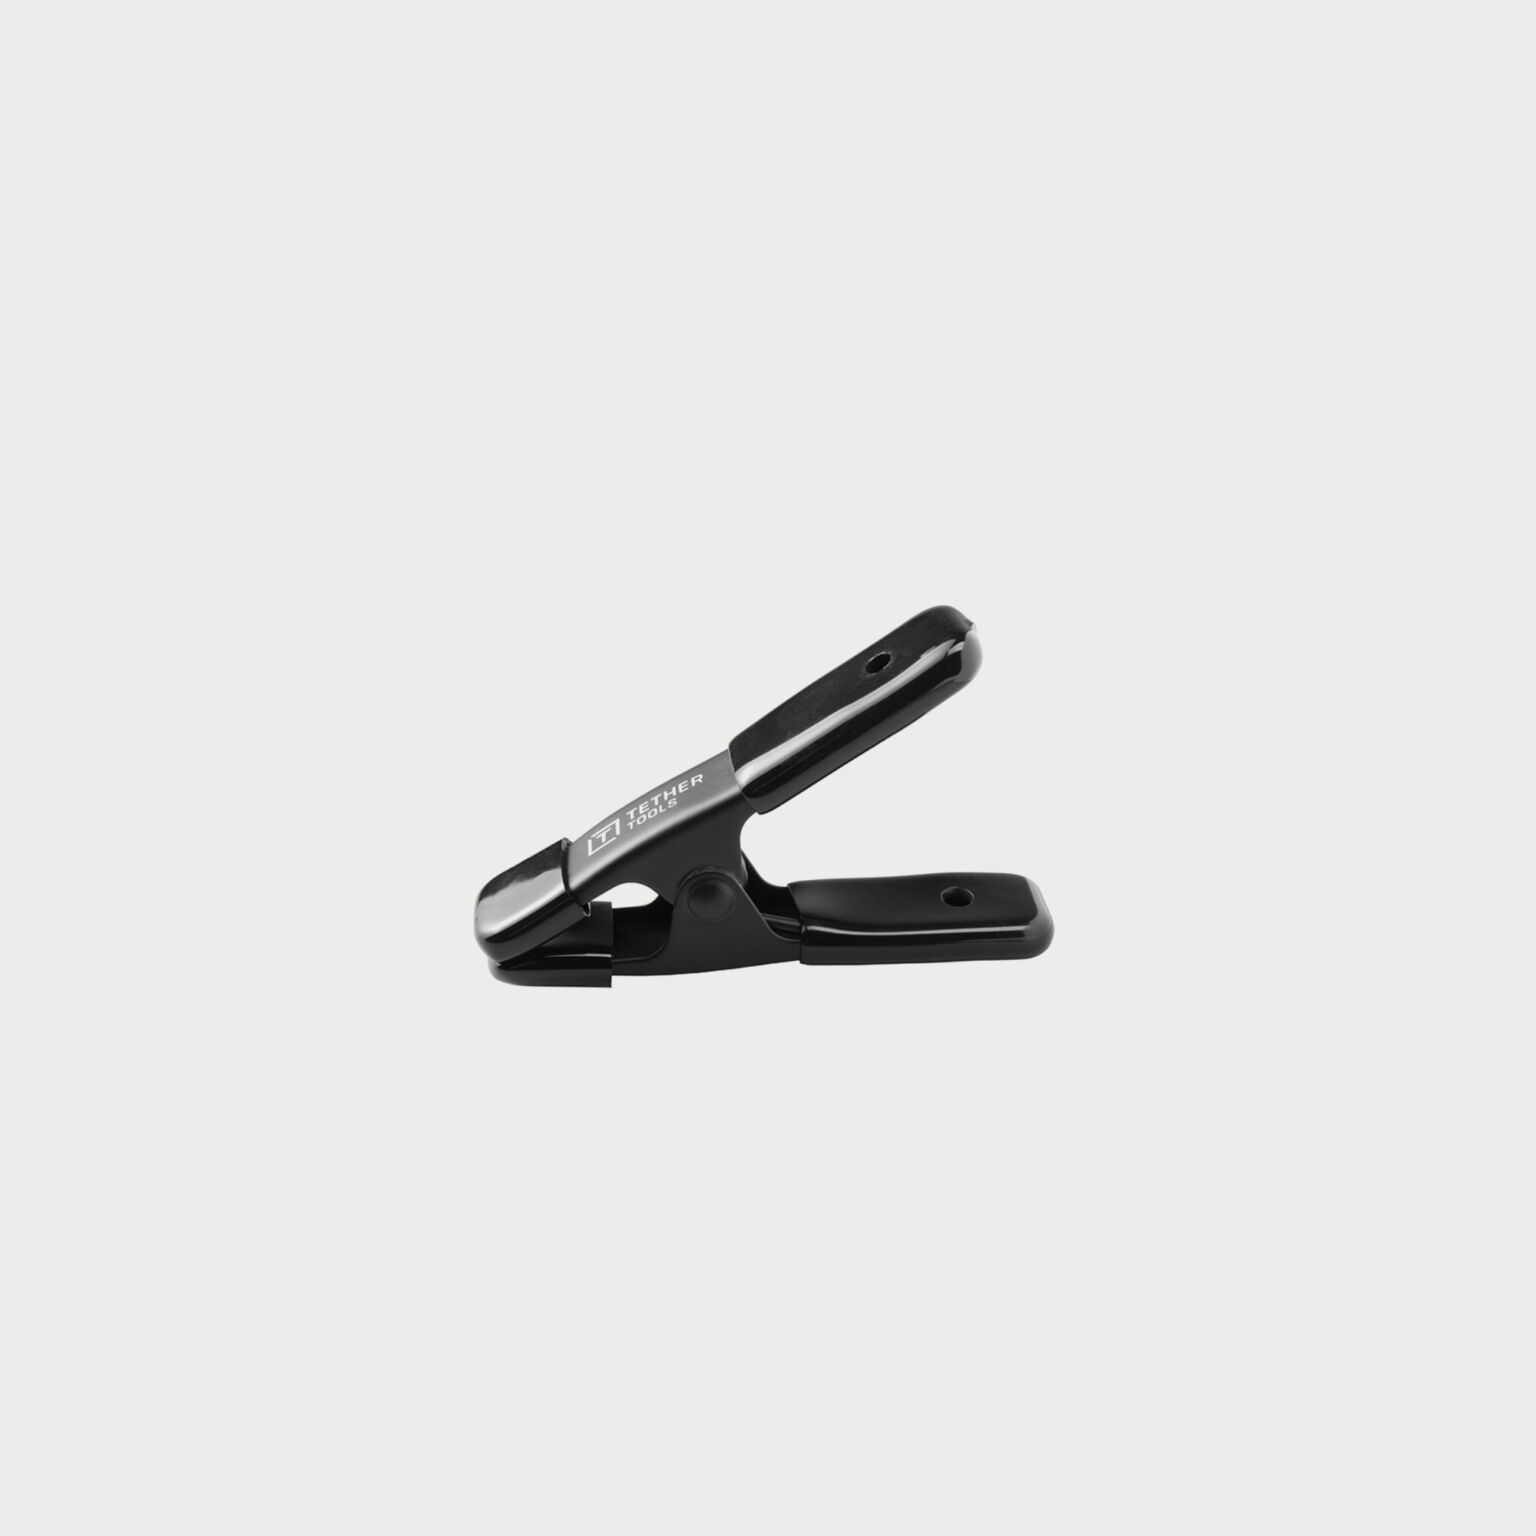 Tether Tools Rock Solid A Clamp 1%e2%80%b3 Black